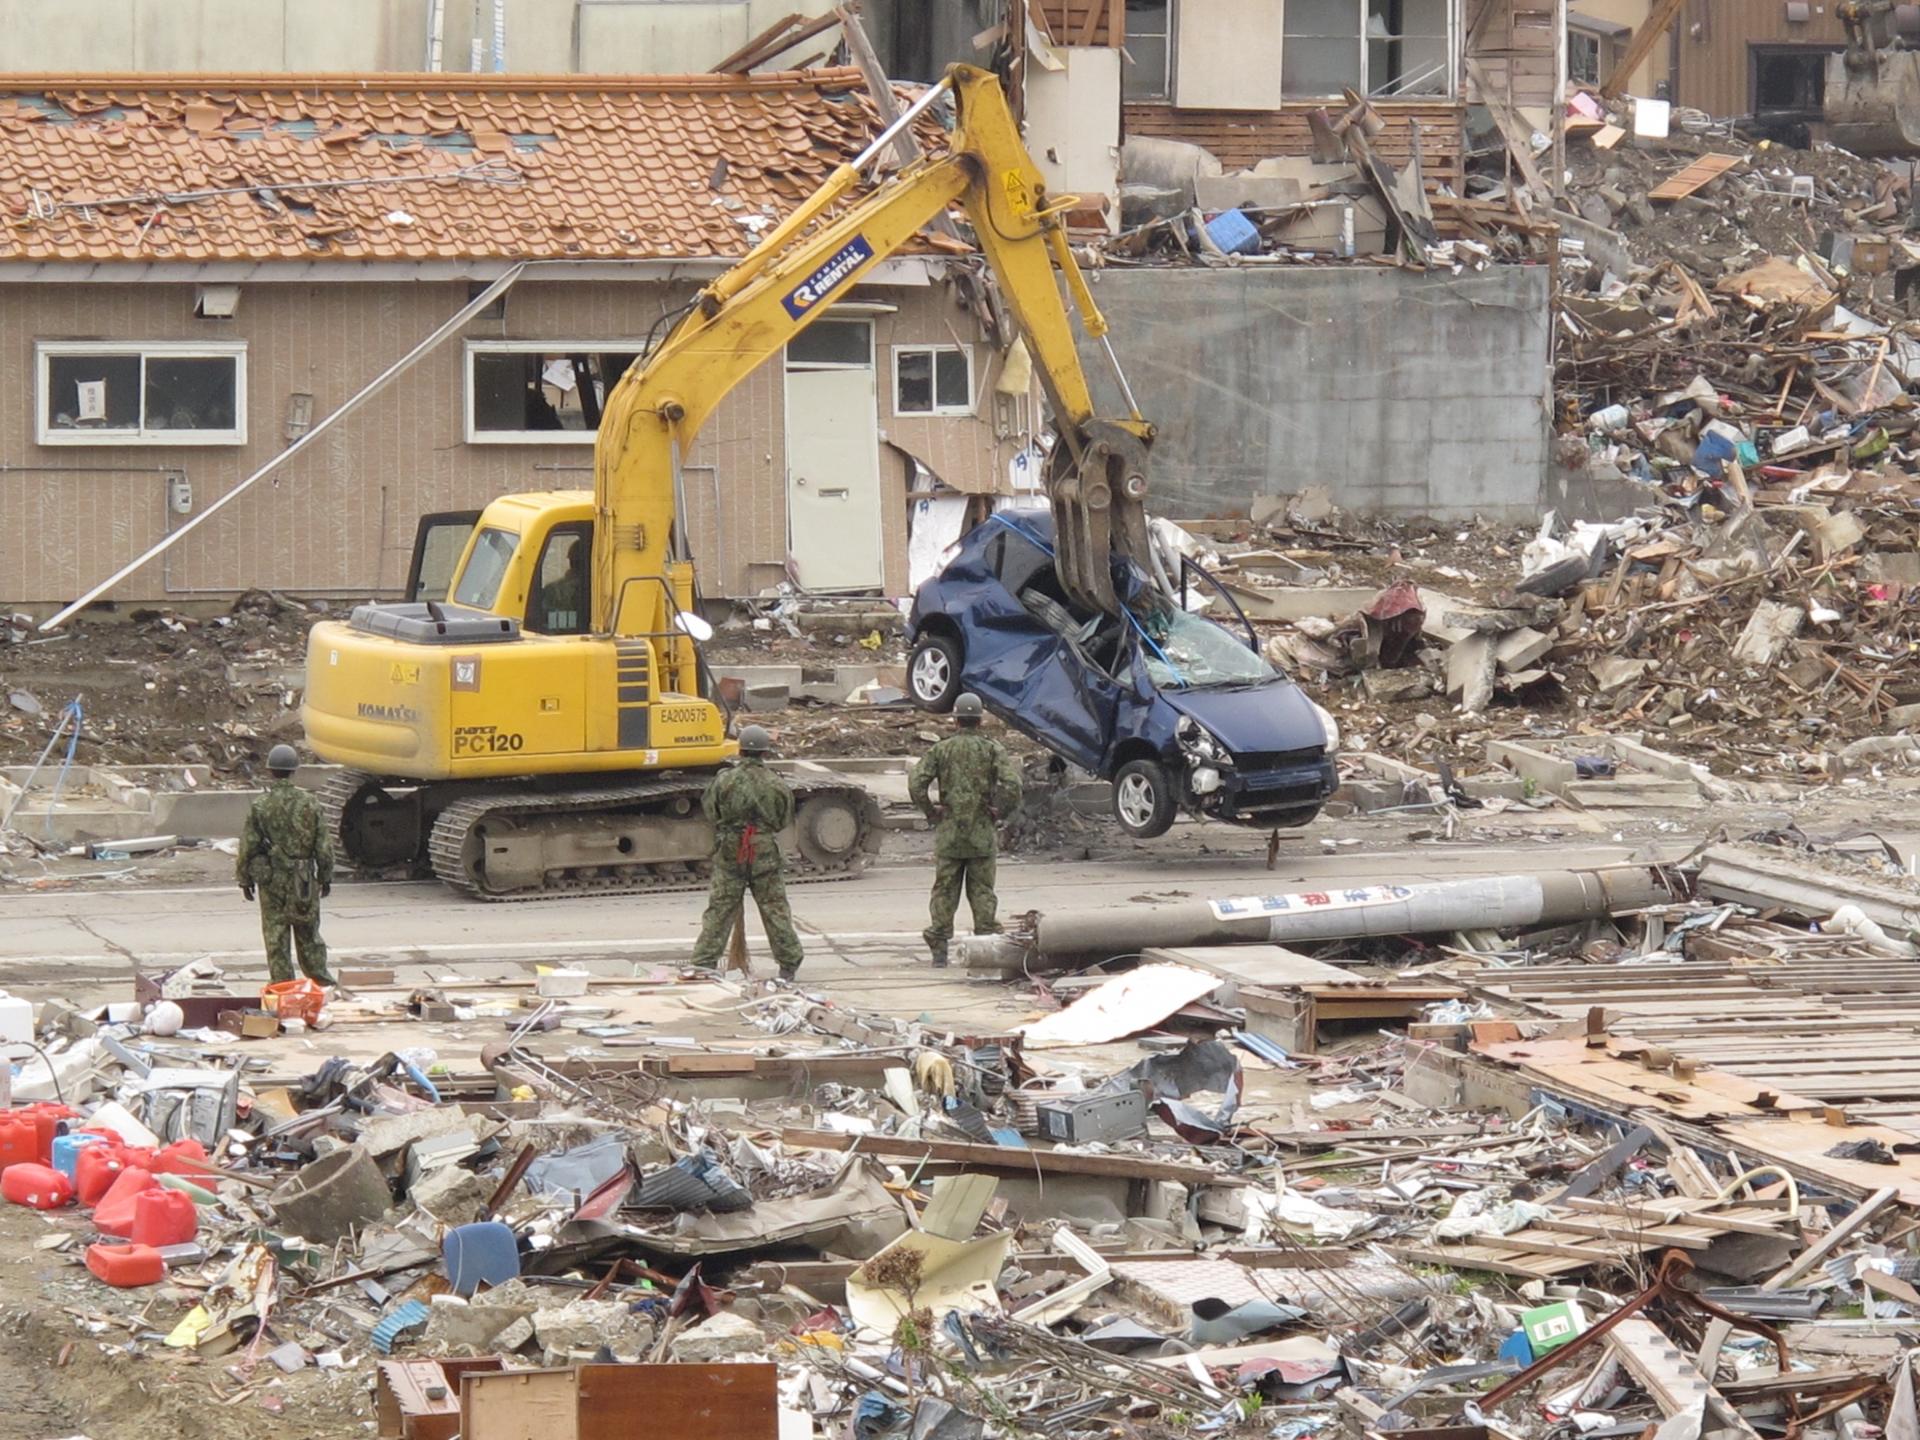 A yellow crane with a long arm is shown lifting up a destroyed blue car with damaged buildings all over.